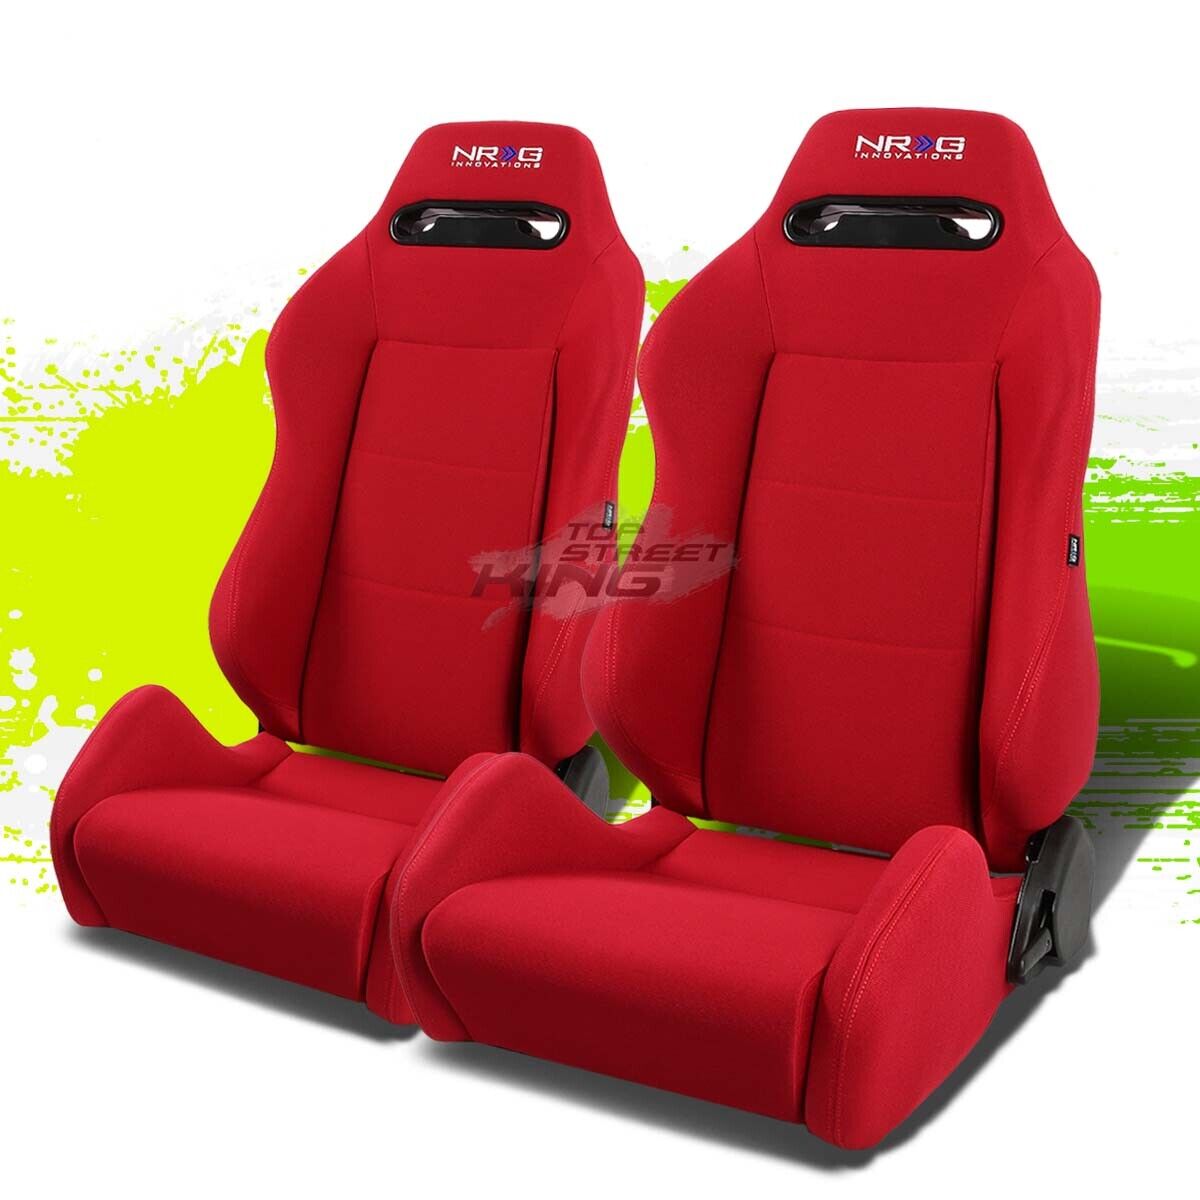 2 X NRG TYPE-R FULLY RECLINABLE LIGHT SEAT/SEATS+ADJUSTABLE SLIDER RED+STITCH